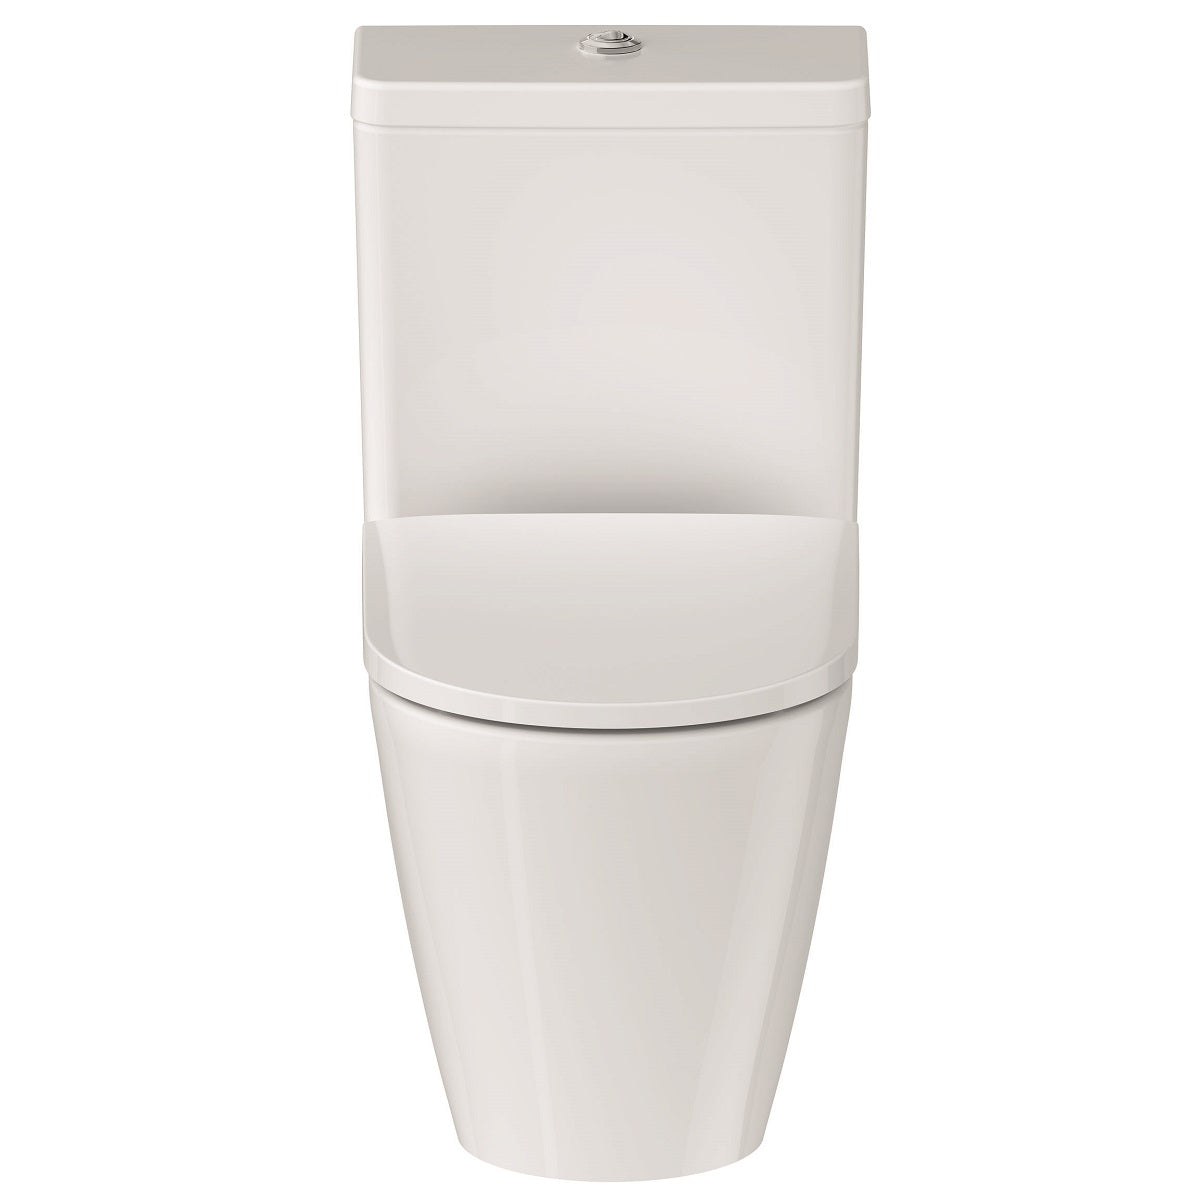 Duravit D-Neo Back to Wall Toilet Suite